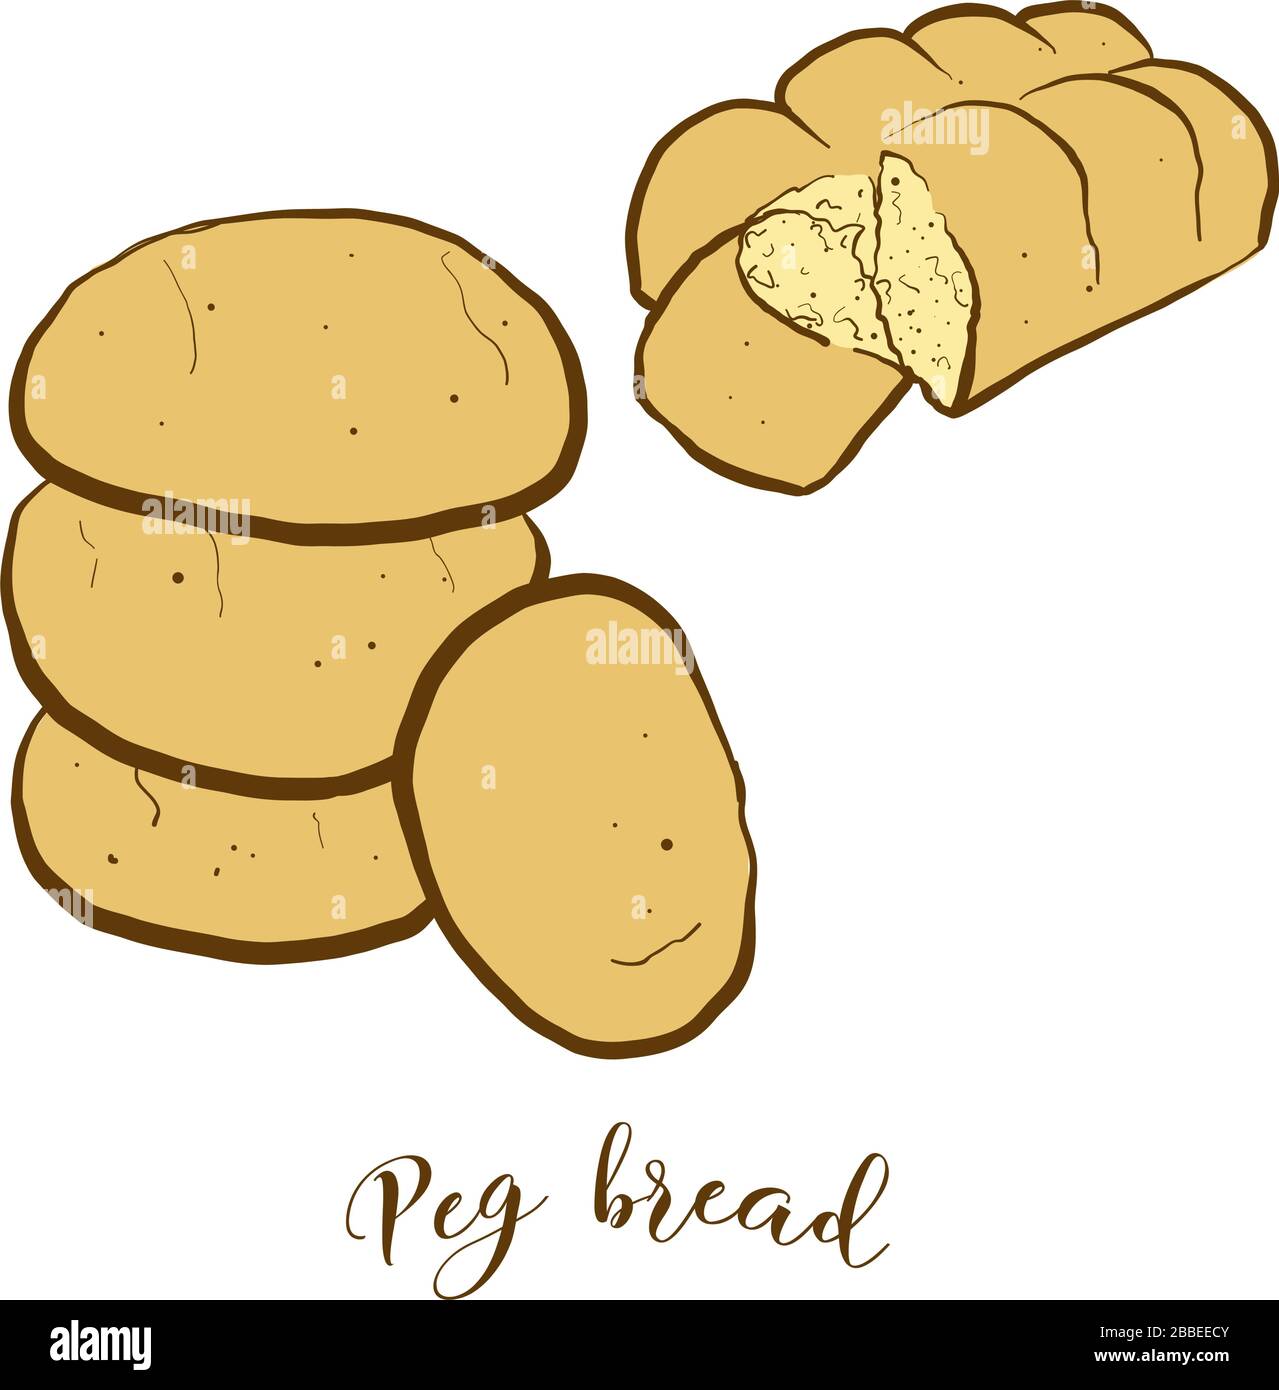 Colored drawing of Peg bread bread. Vector illustration of Leavened, lobed loaf food, usually known in Jamaica. Colored Bread sketches. Stock Vector